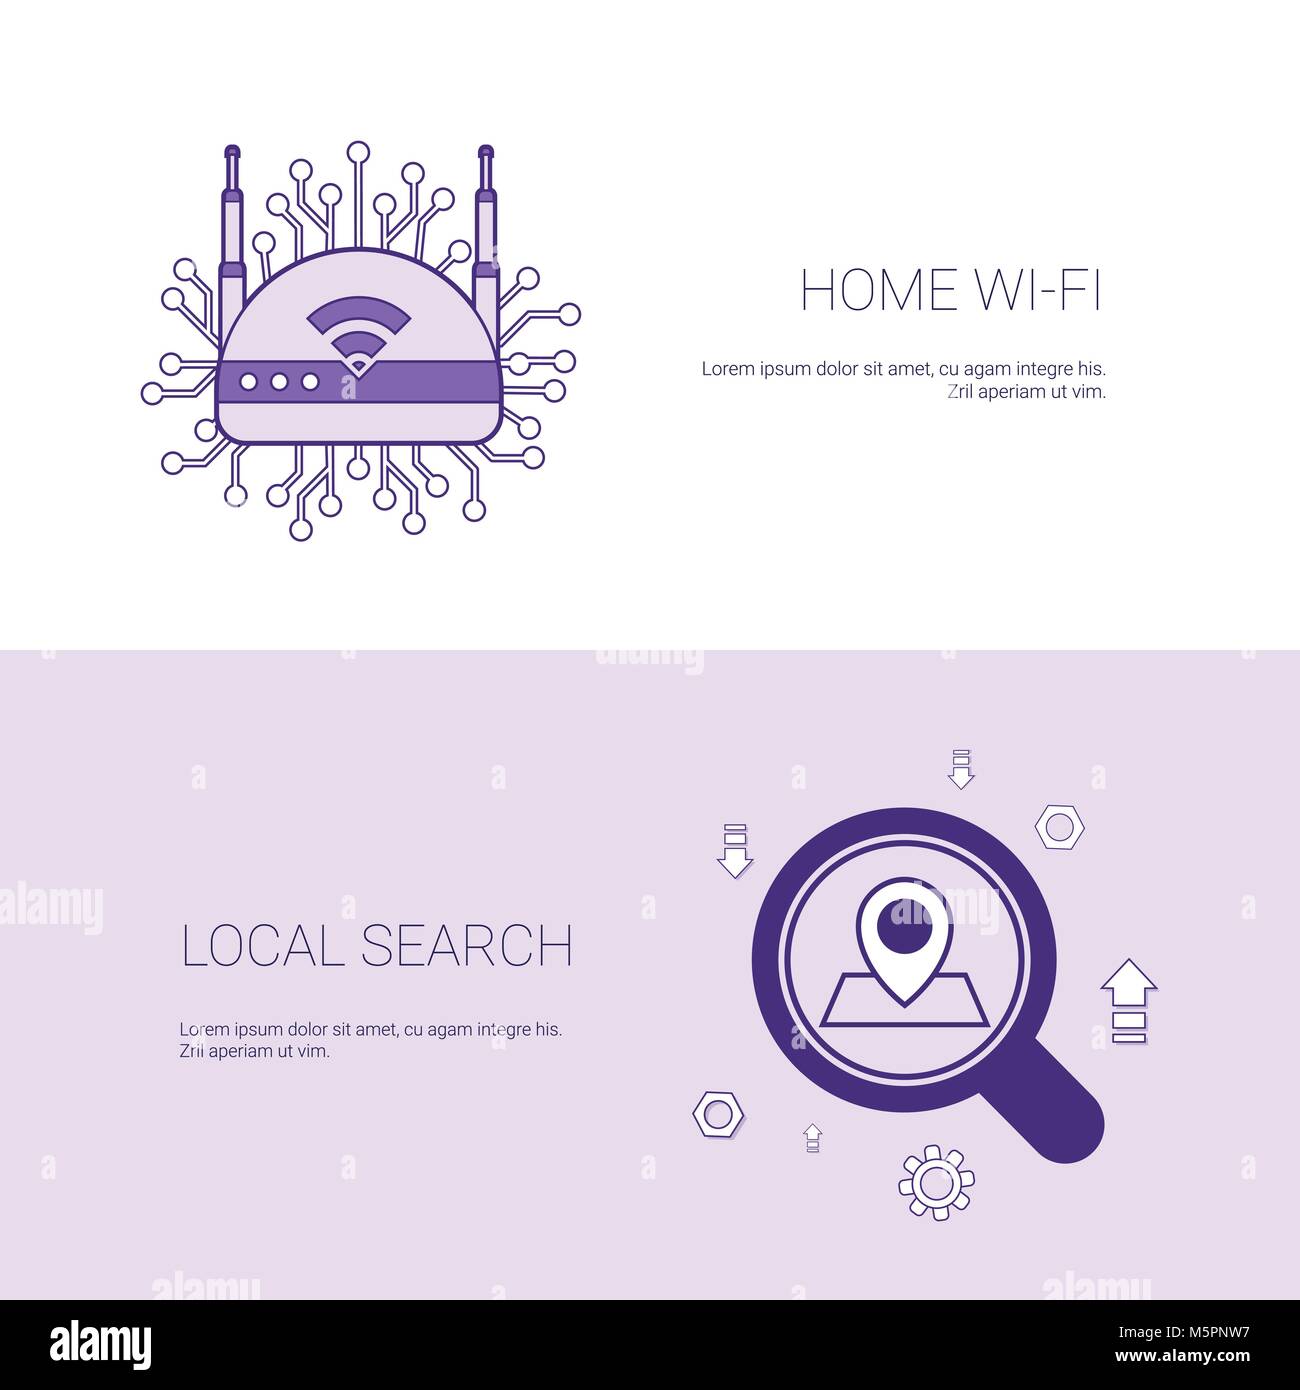 Home Wifi And Local Search Concept Template Web Banner With Copy Space Stock Vector